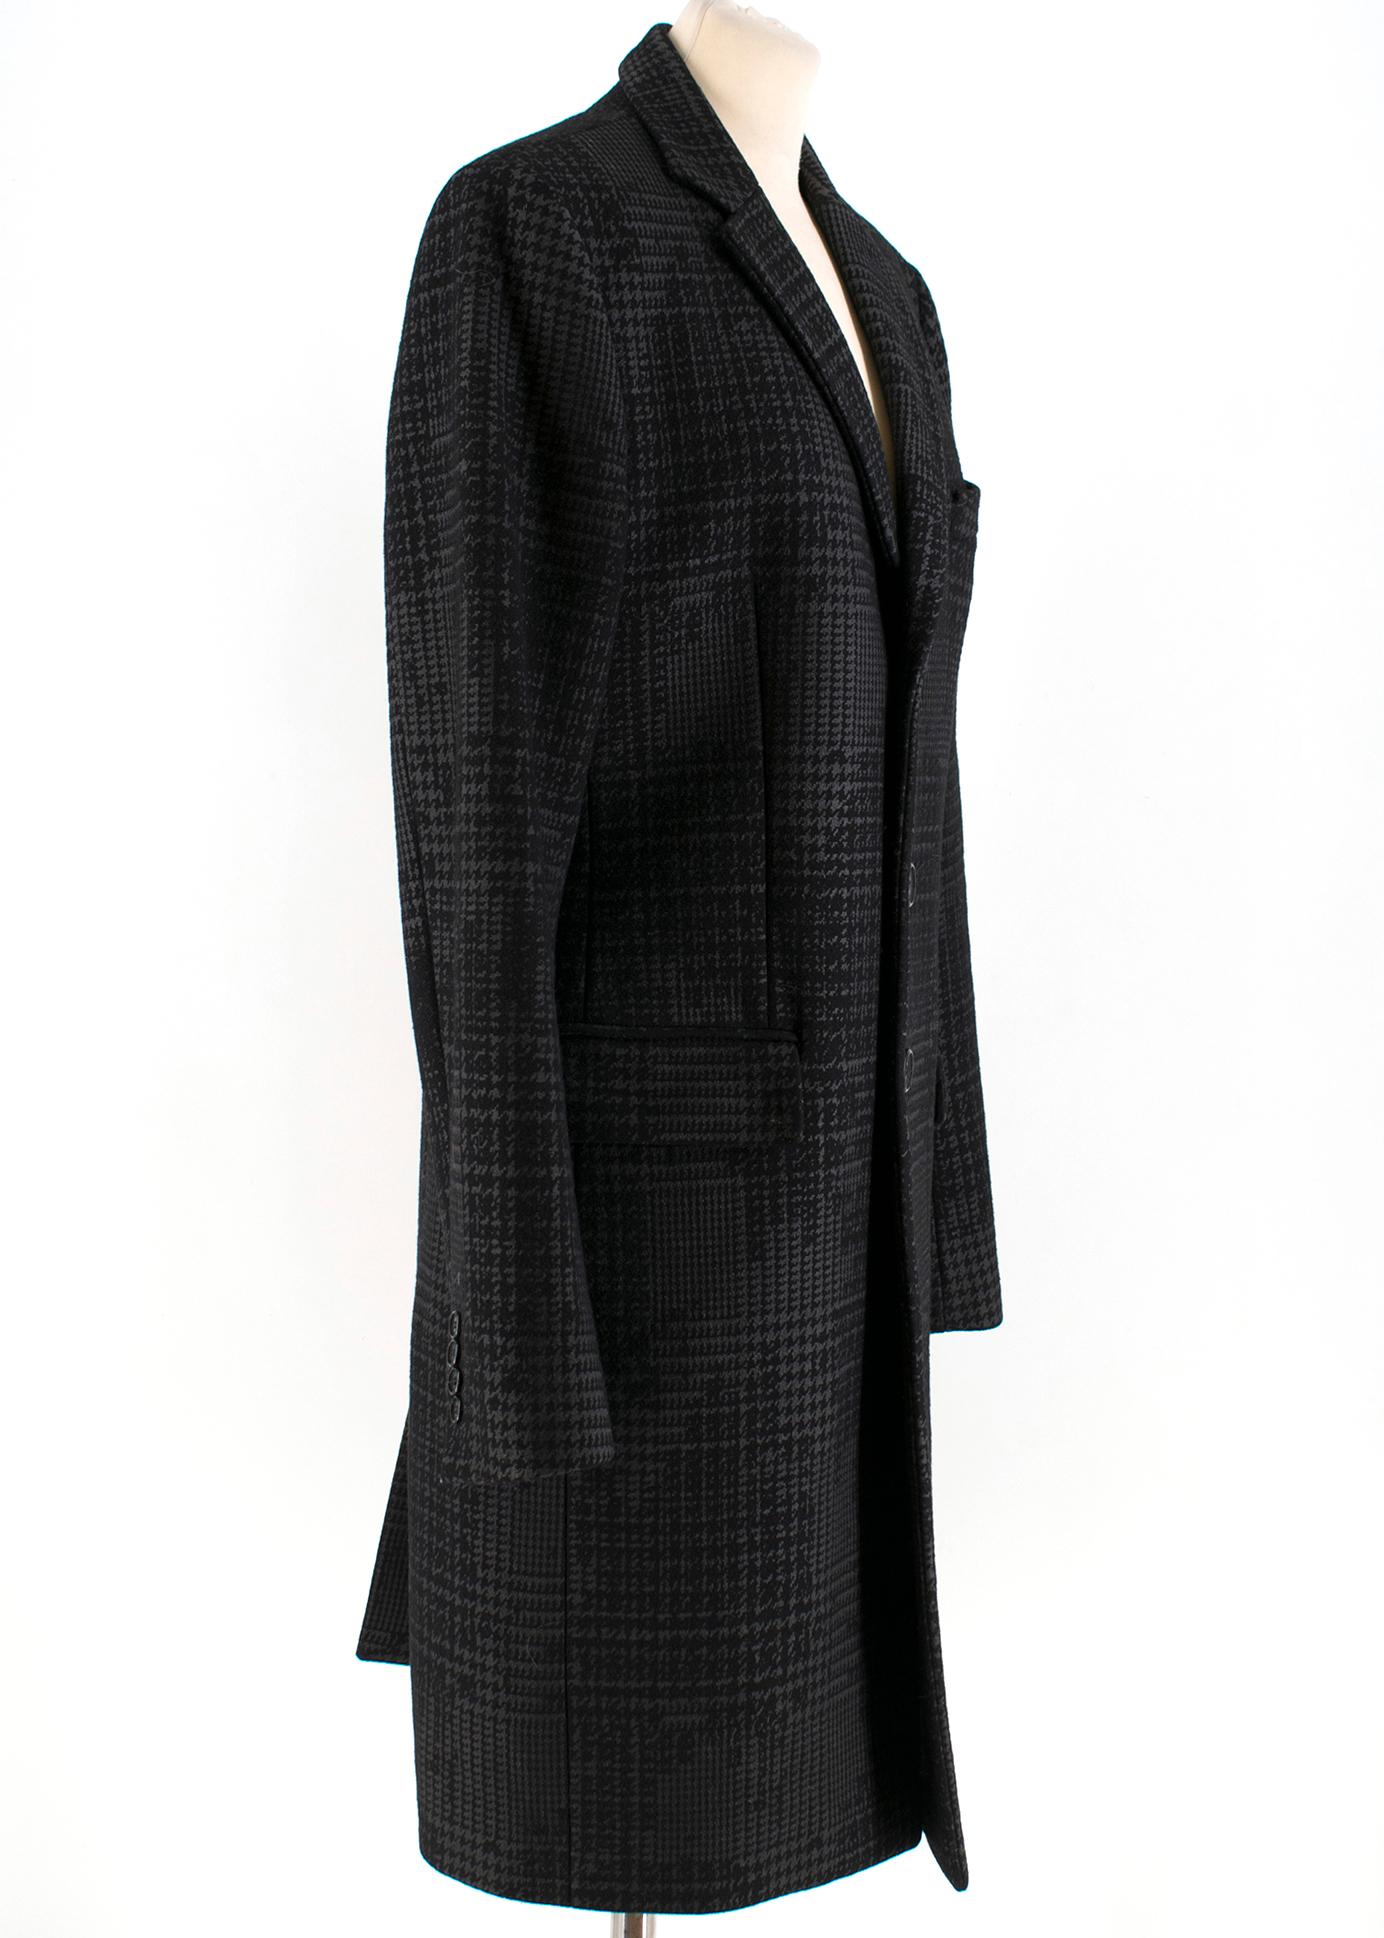 Givenchy Men's Tweed-Effect Print Single Breasted Coat

- Black tweed-effect print coat
- Heavy-weight
- Wool-felt
- Single breasted three buttons fastening
- Notch lapels
- Chest welt pocket
- Front flap pockets
- Buttoned cuffs
- Internal two slit